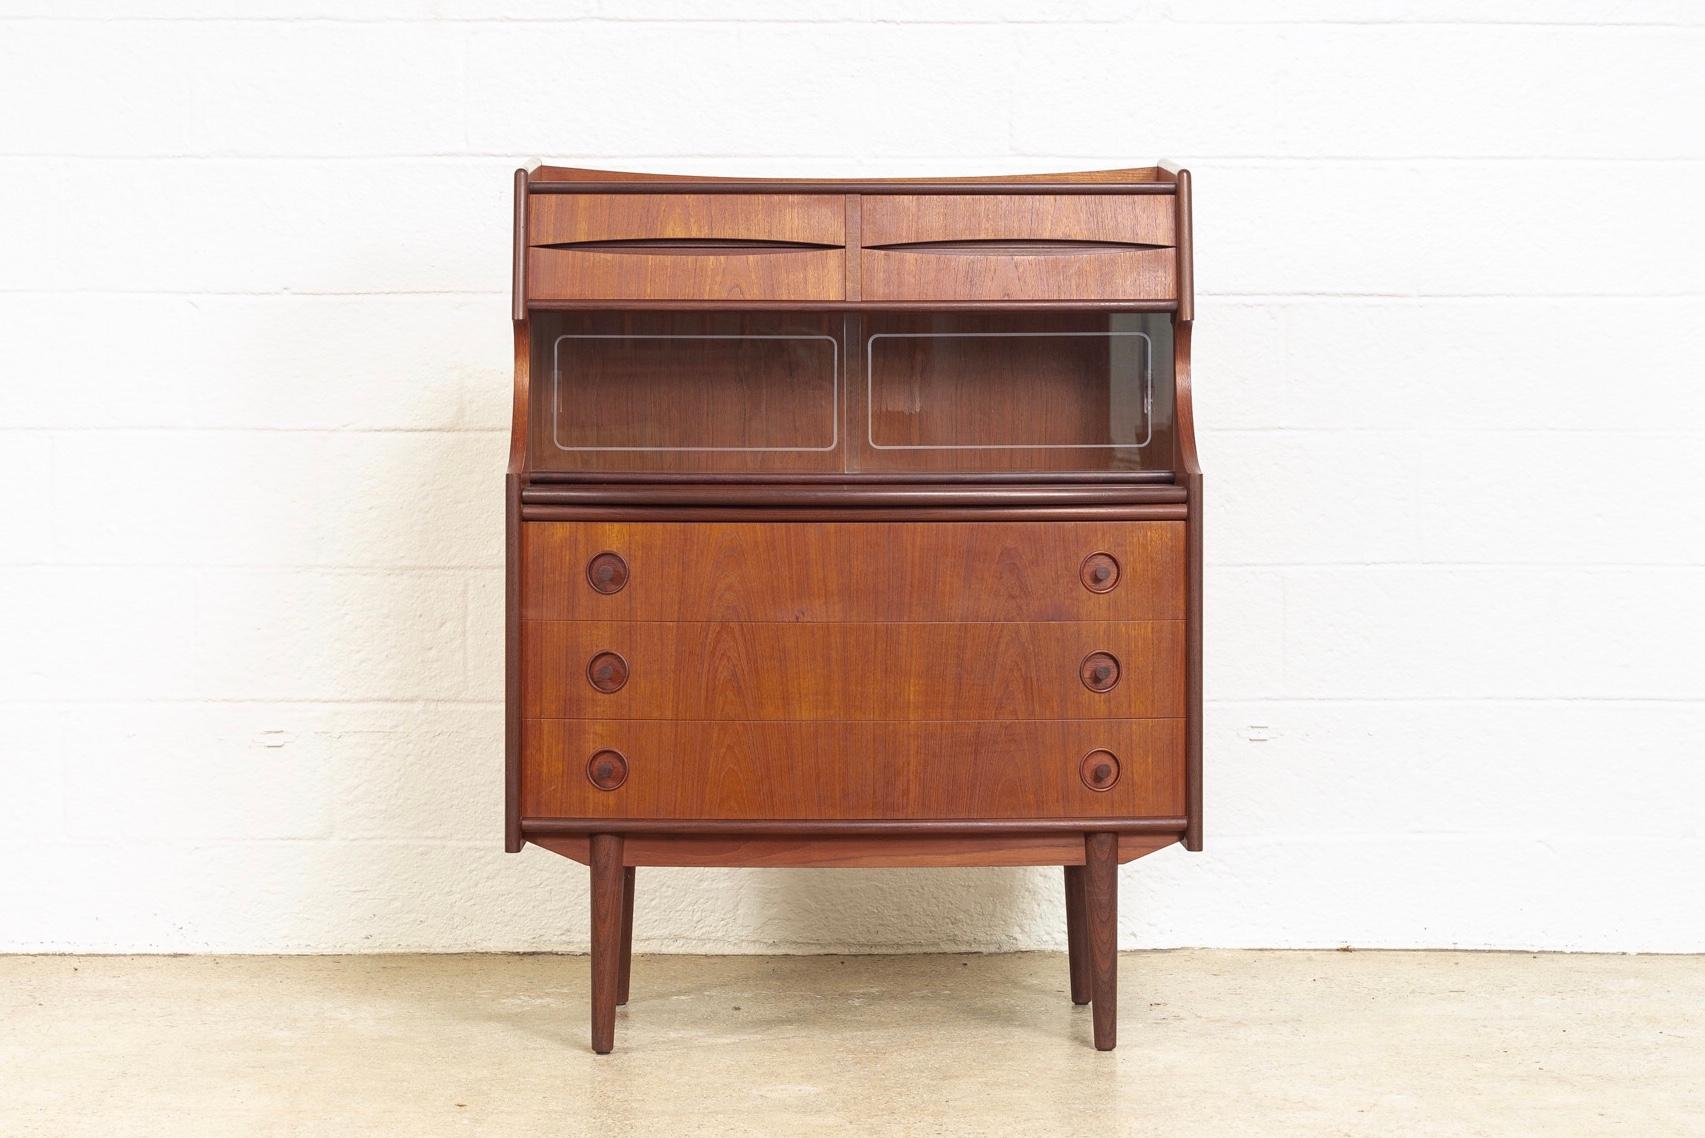 This unique midcentury Danish modern walnut wood secretary desk is, circa 1960. The Classic Scandinavian Modern design has clean Minimalist lines and gentle curves. The rich medium brown walnut wood has beautiful grain and is two-toned with darker